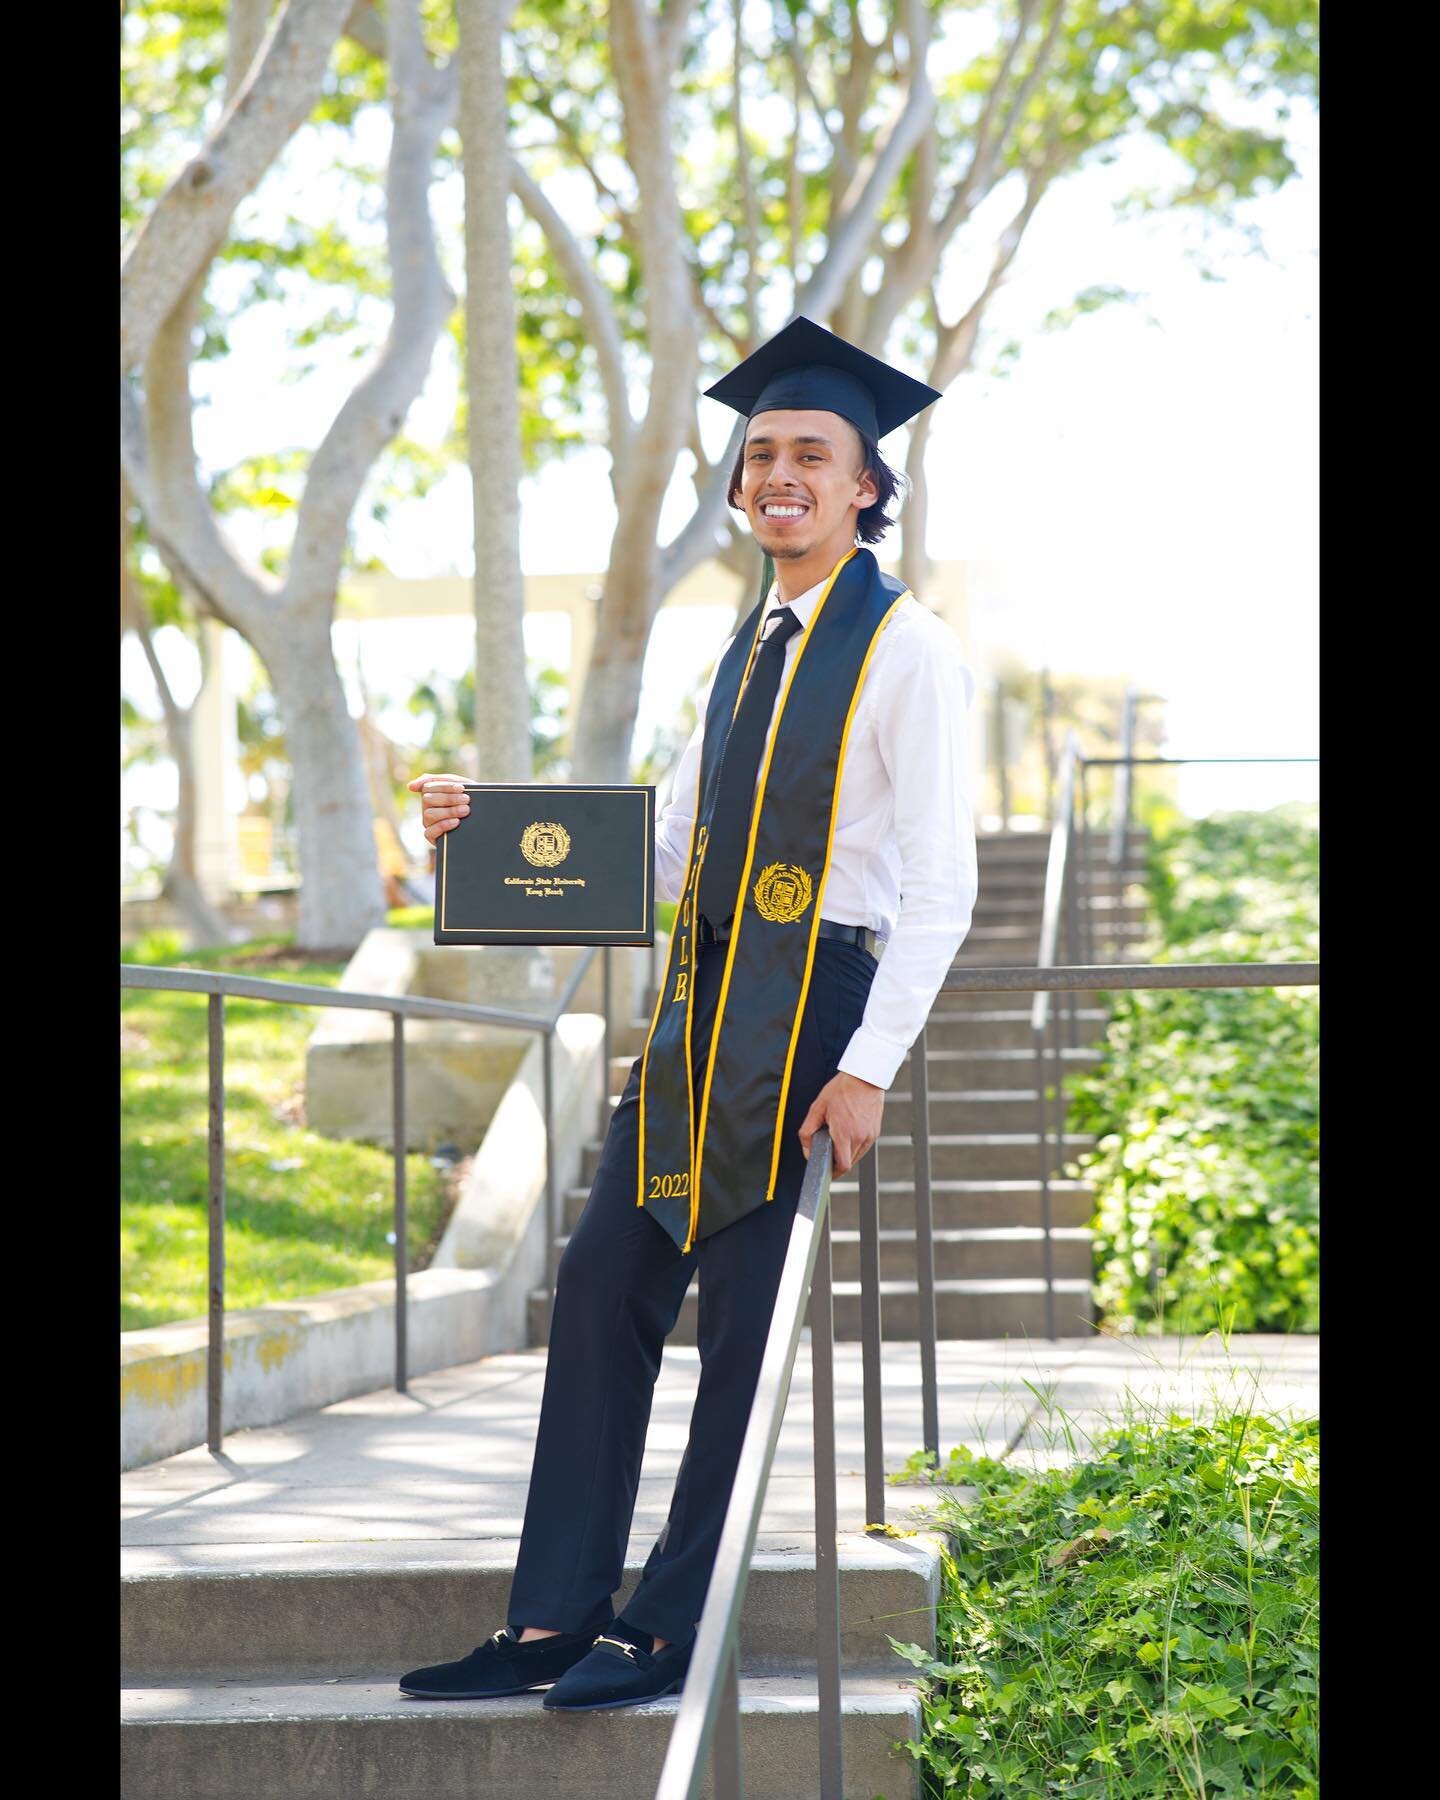 On this day last year, I graduated with my degree from California State University Long Beach. My higher self will always thank myself for securing the foundation needed to ensure my future&rsquo;s stability.